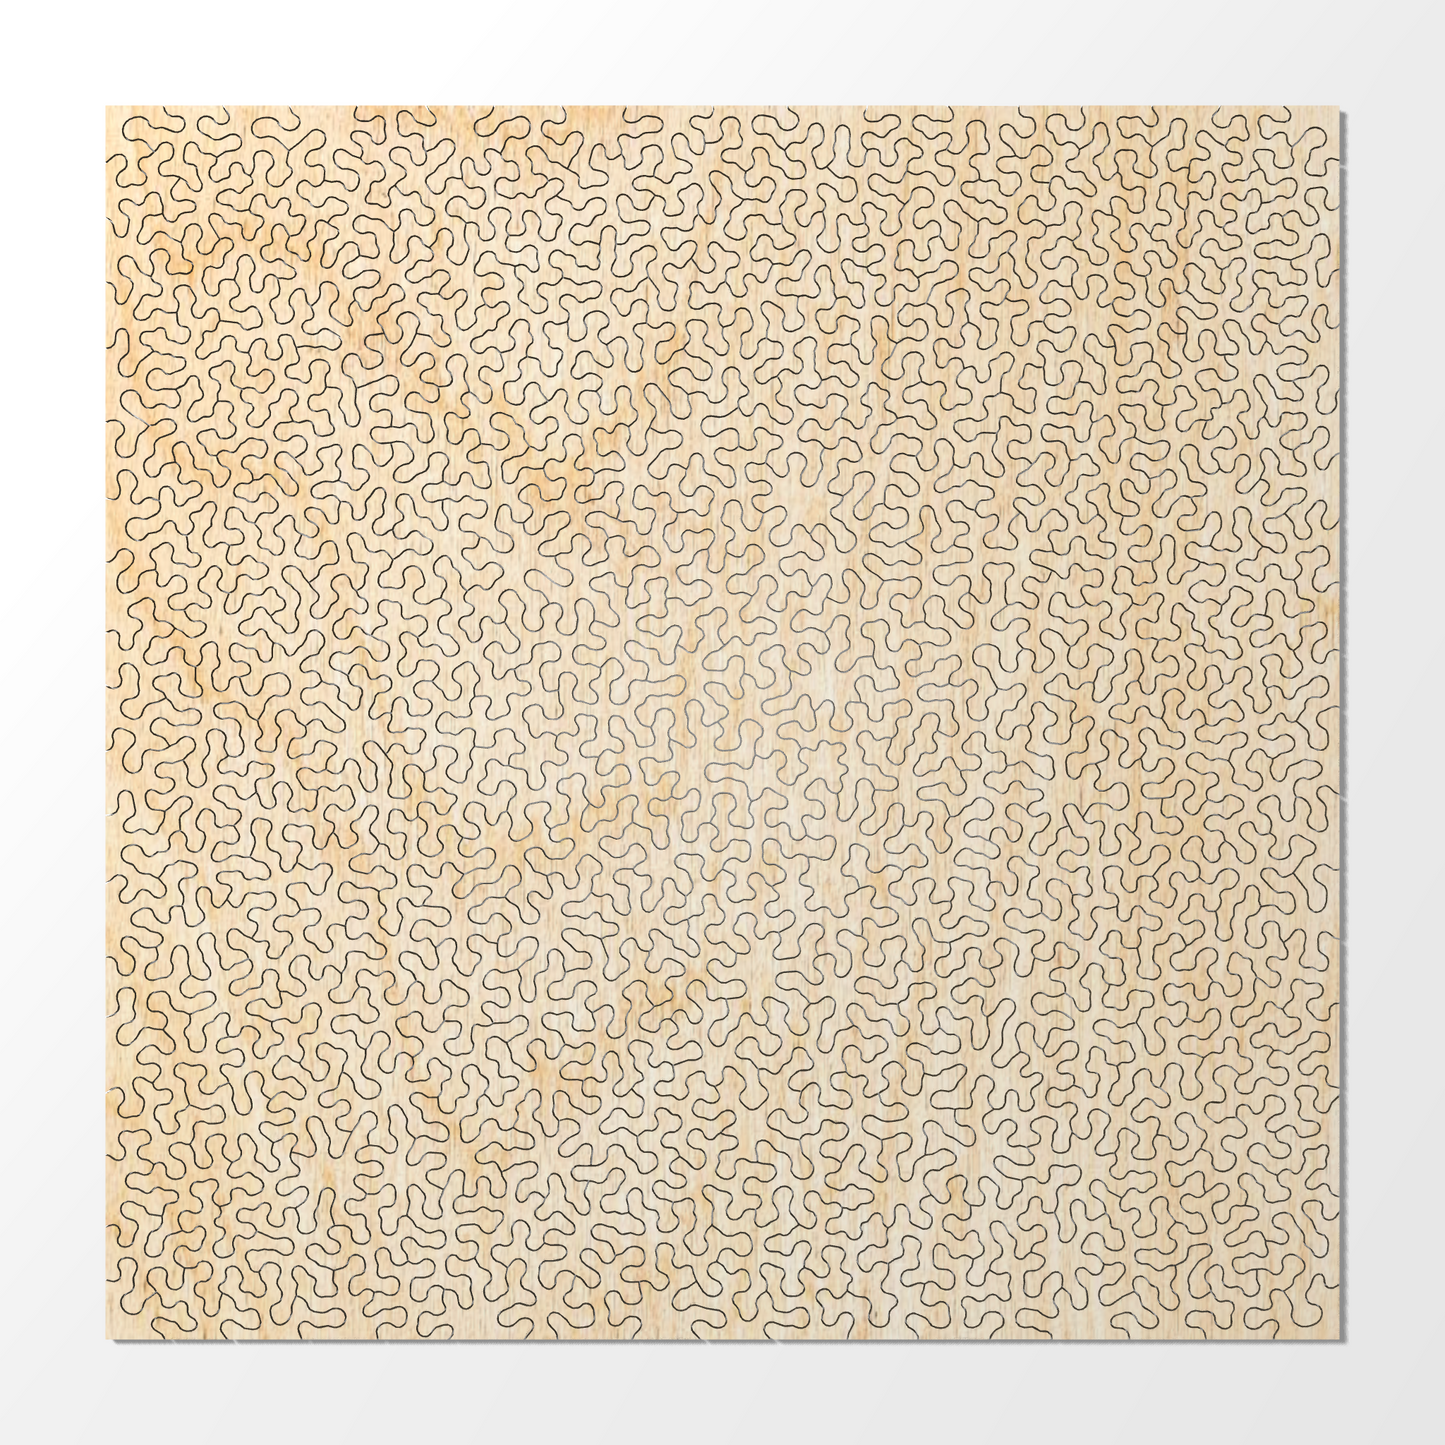 FIELDS | Wooden Puzzle | code+wood generative art puzzles